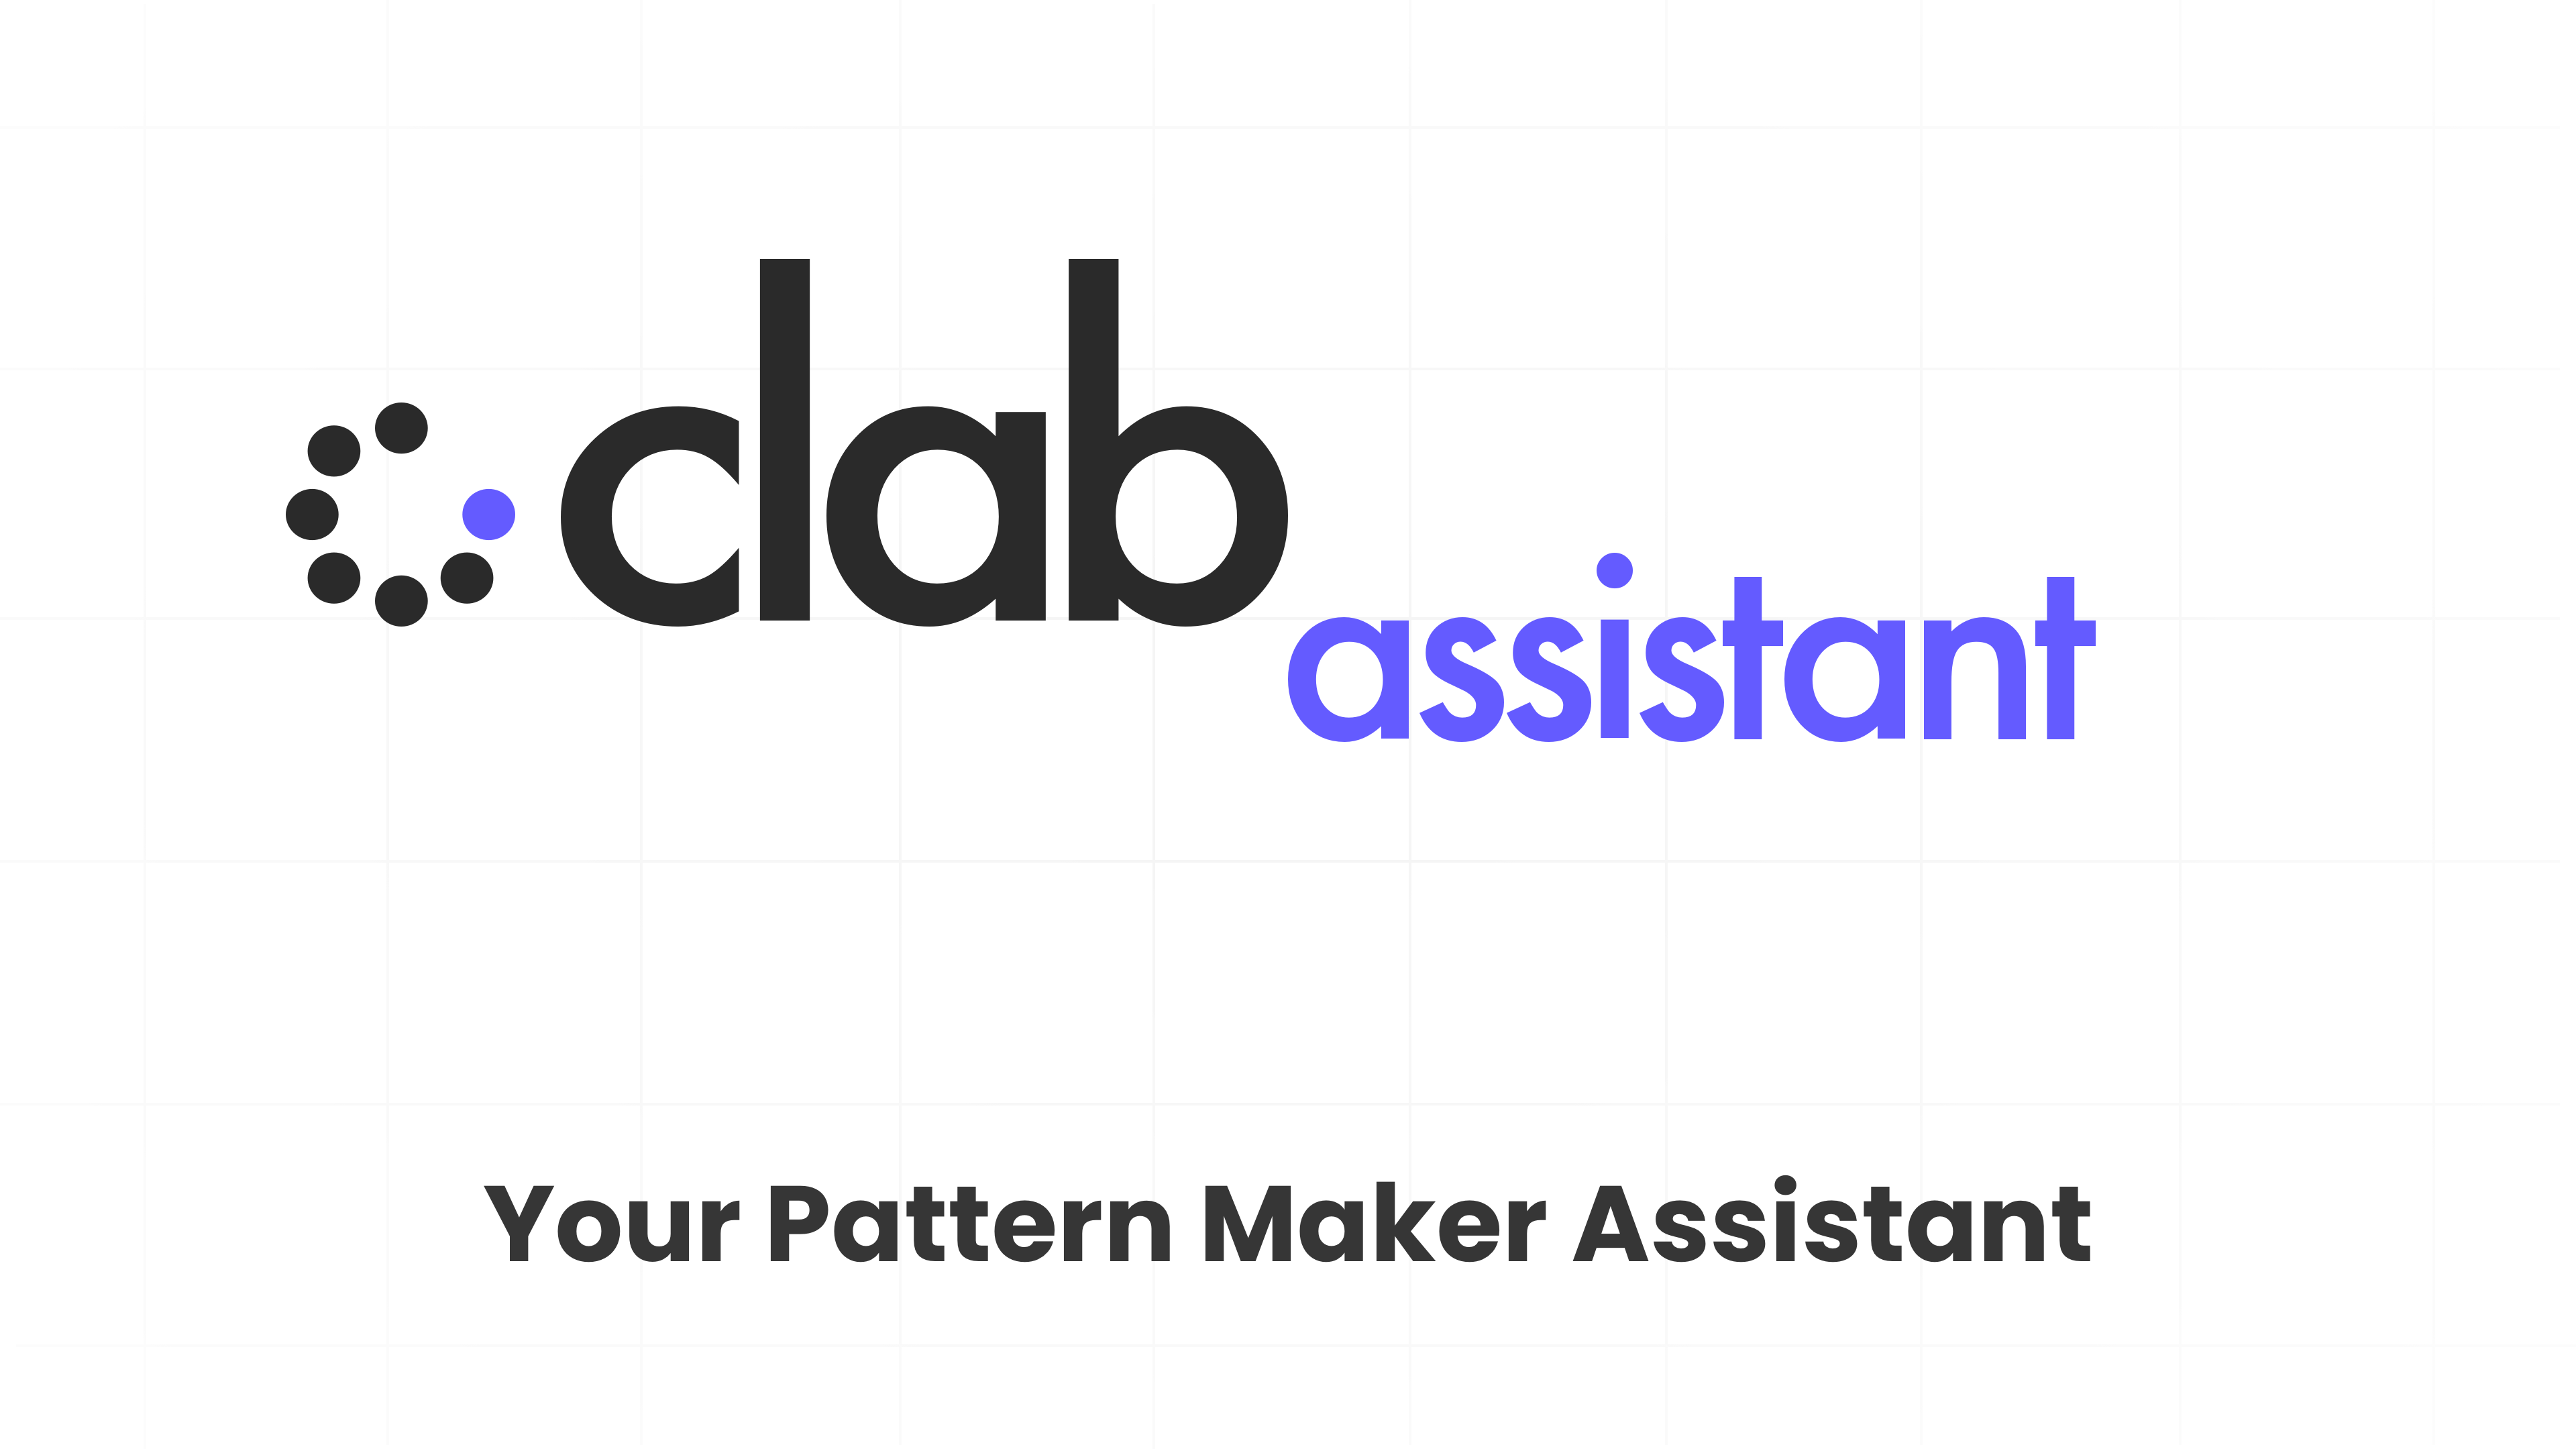 Clab Assistant Video